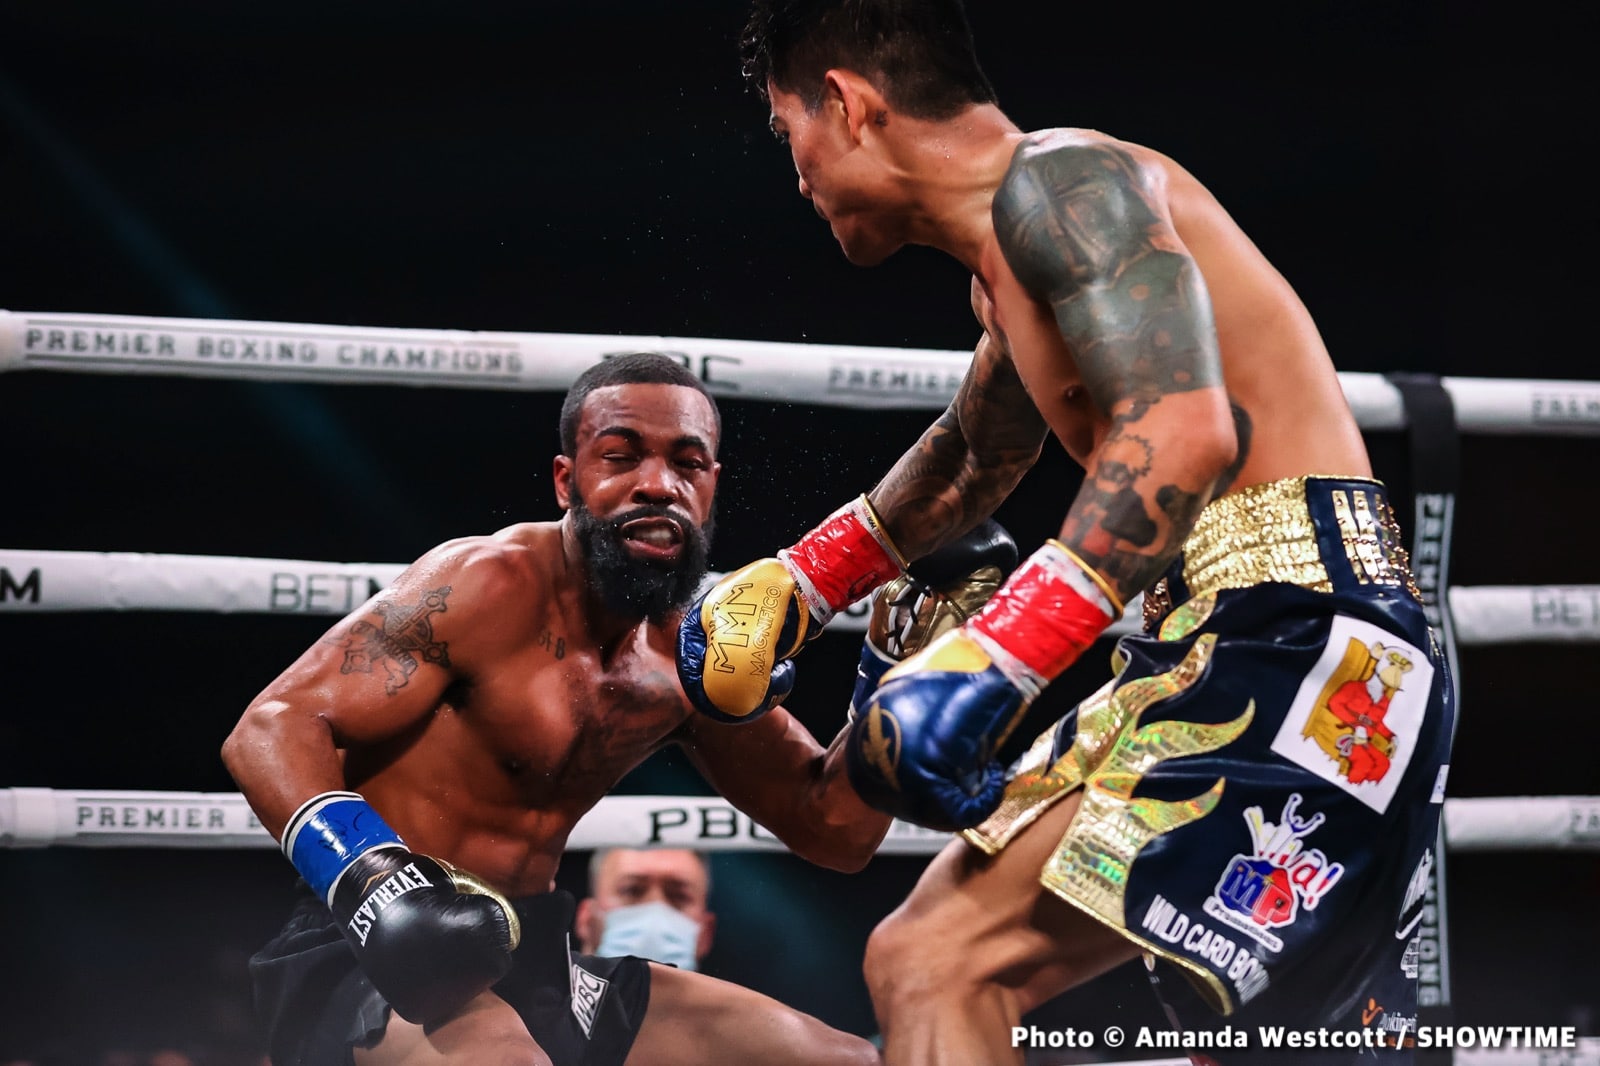 Gary Russell Jr: 'I Beat' Magsayo 10 to 2, claims robbery